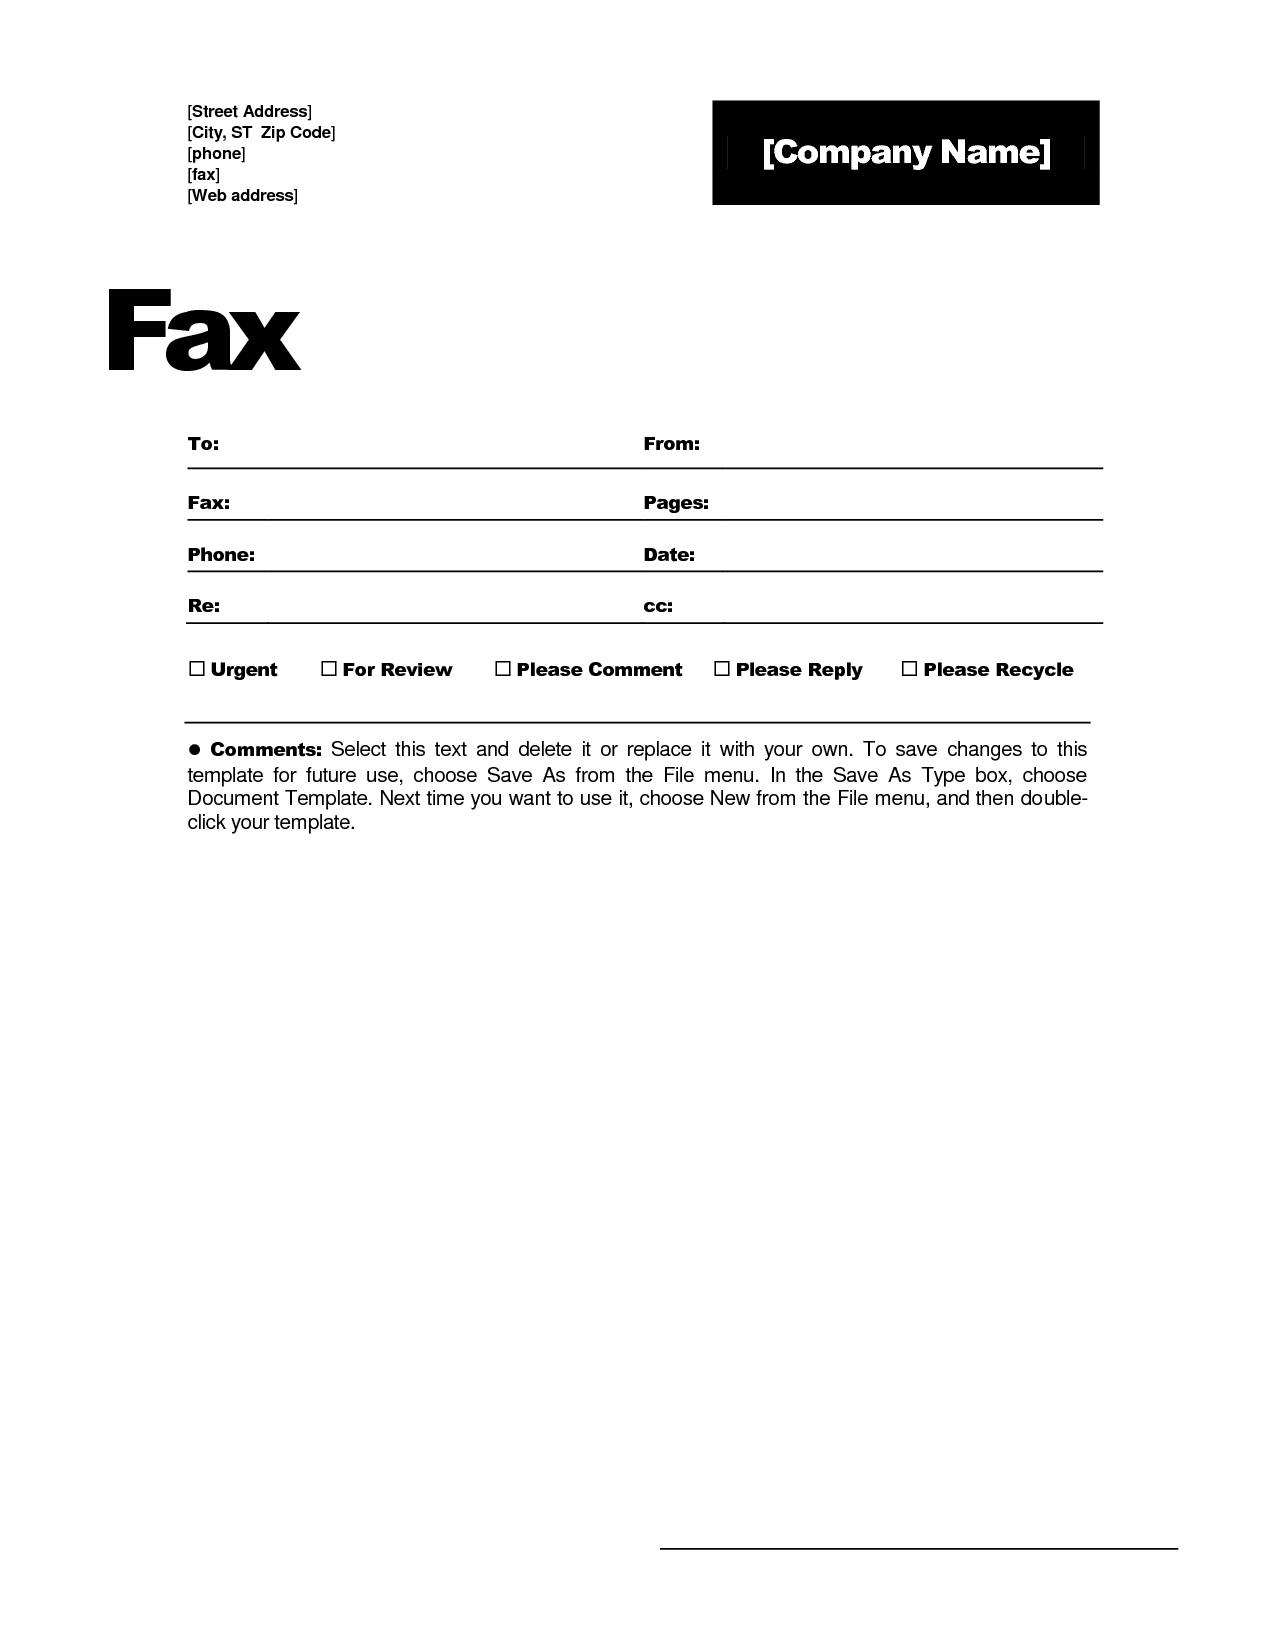 Best Photos Of Fax Templates Microsoft Word 2010 - Fax Cover Throughout Fax Template Word 2010